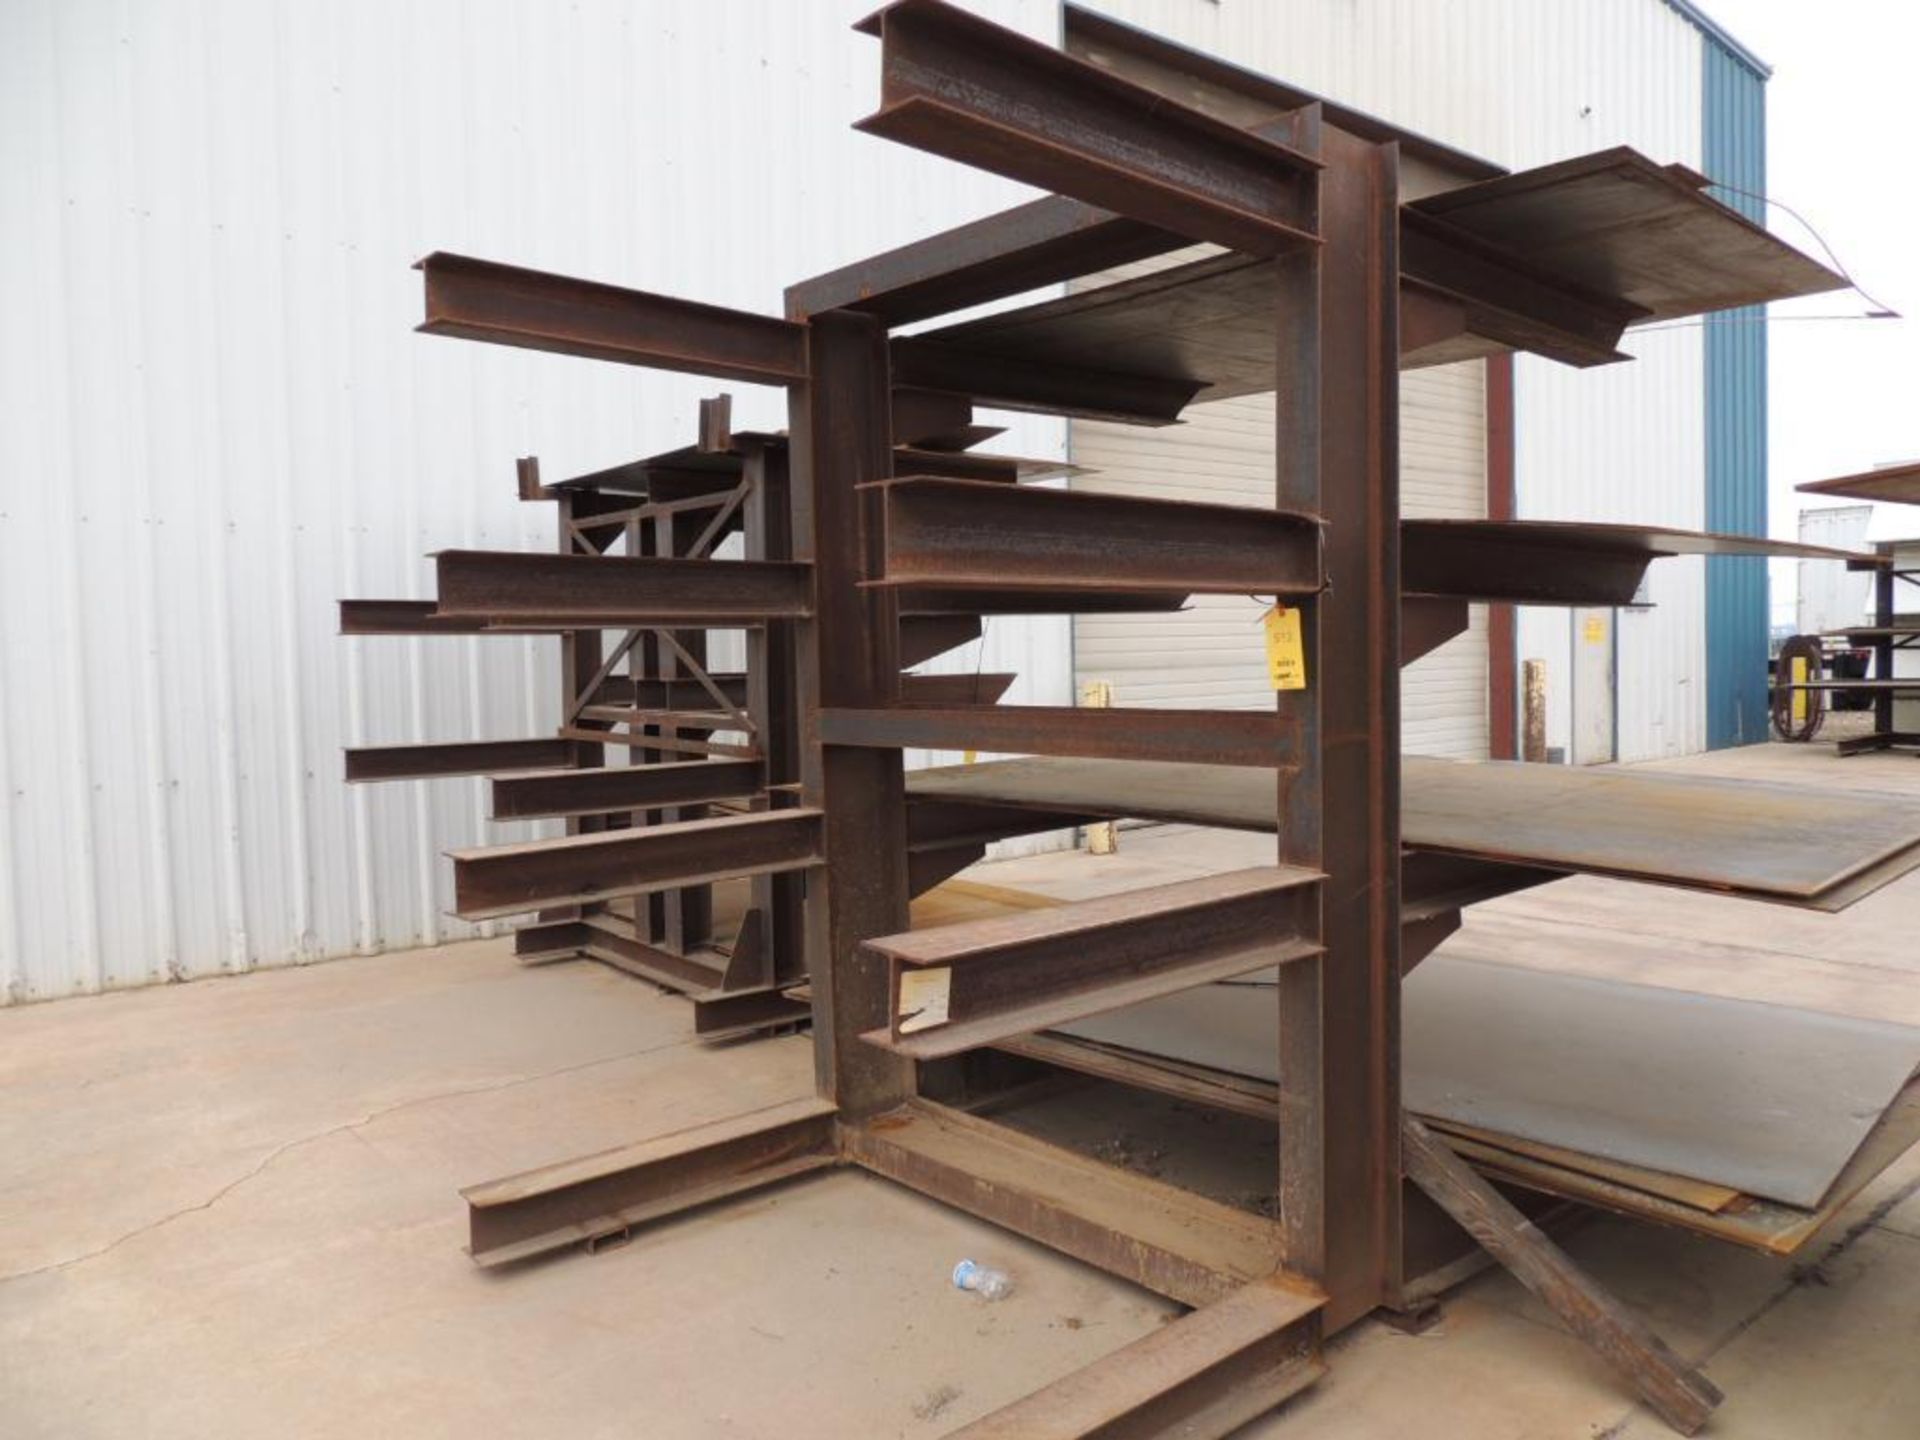 103 in. Wide x 4 ft. Deep x 12 ft. High Double-Leg Double-Side Fabricated I-Beam Material Stand (#15 - Image 2 of 2